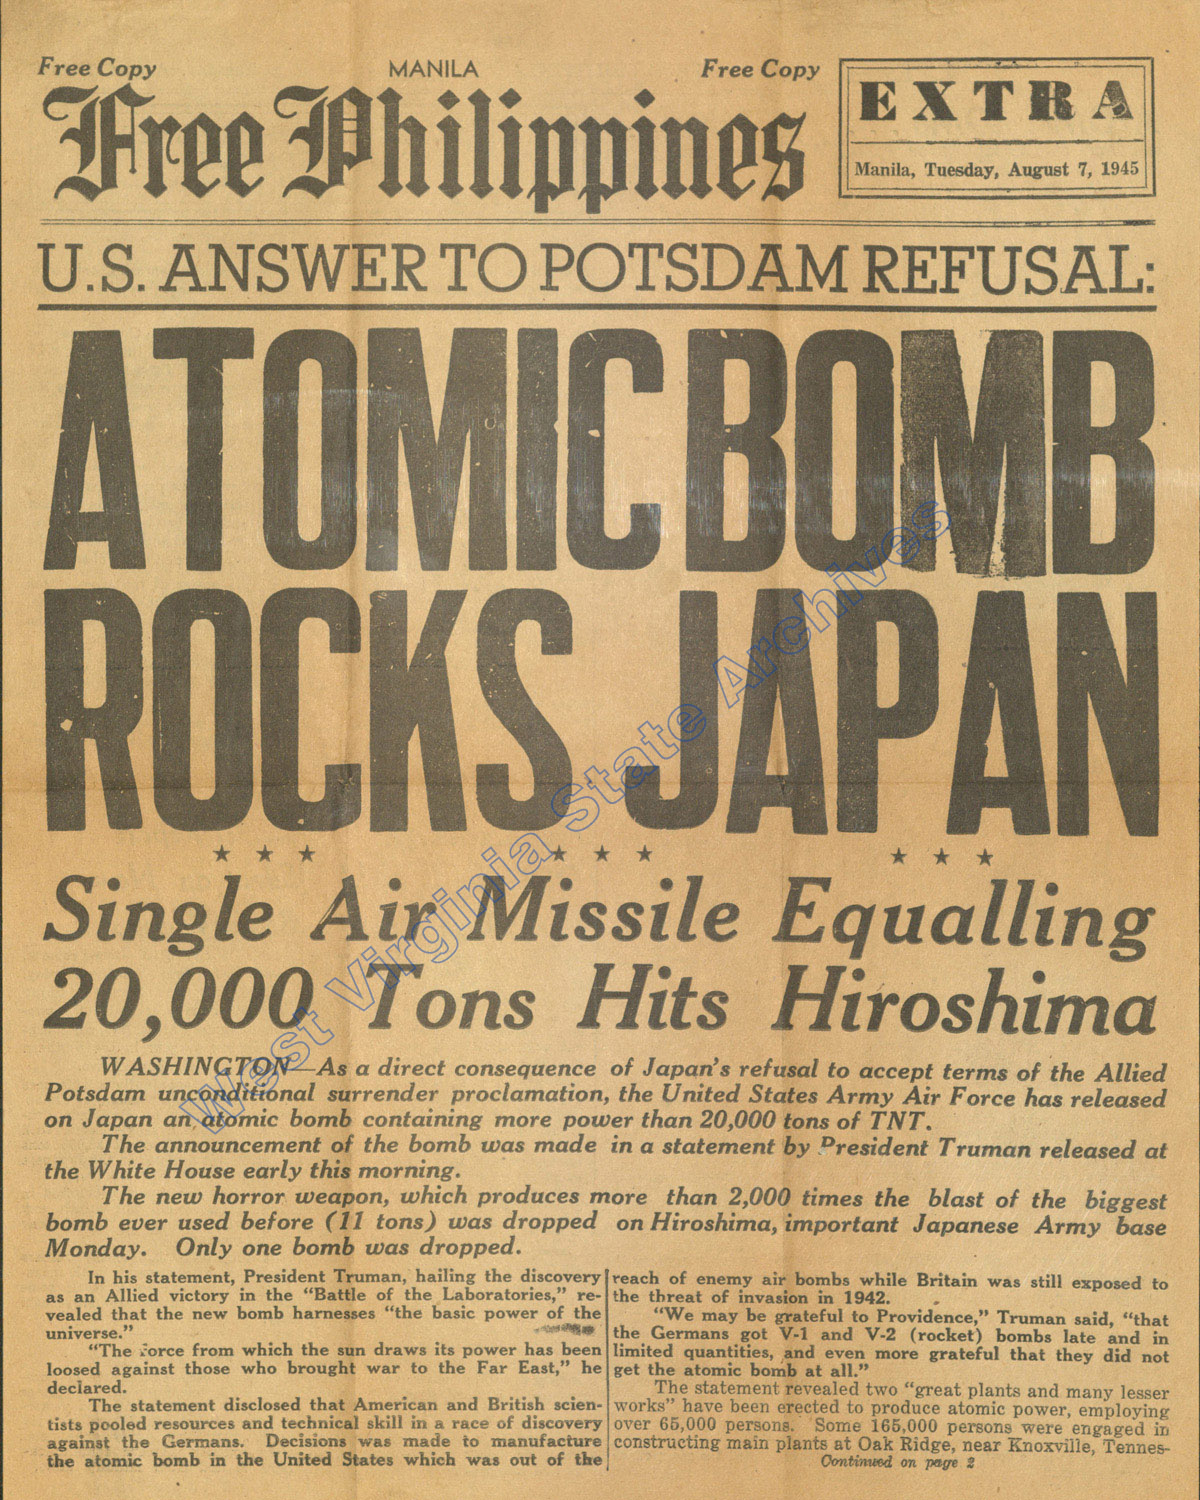 Front page of Philippines Free Press announcing dropping of an atomic bomb on Hiroshima, 1945. (Sc2013-098)